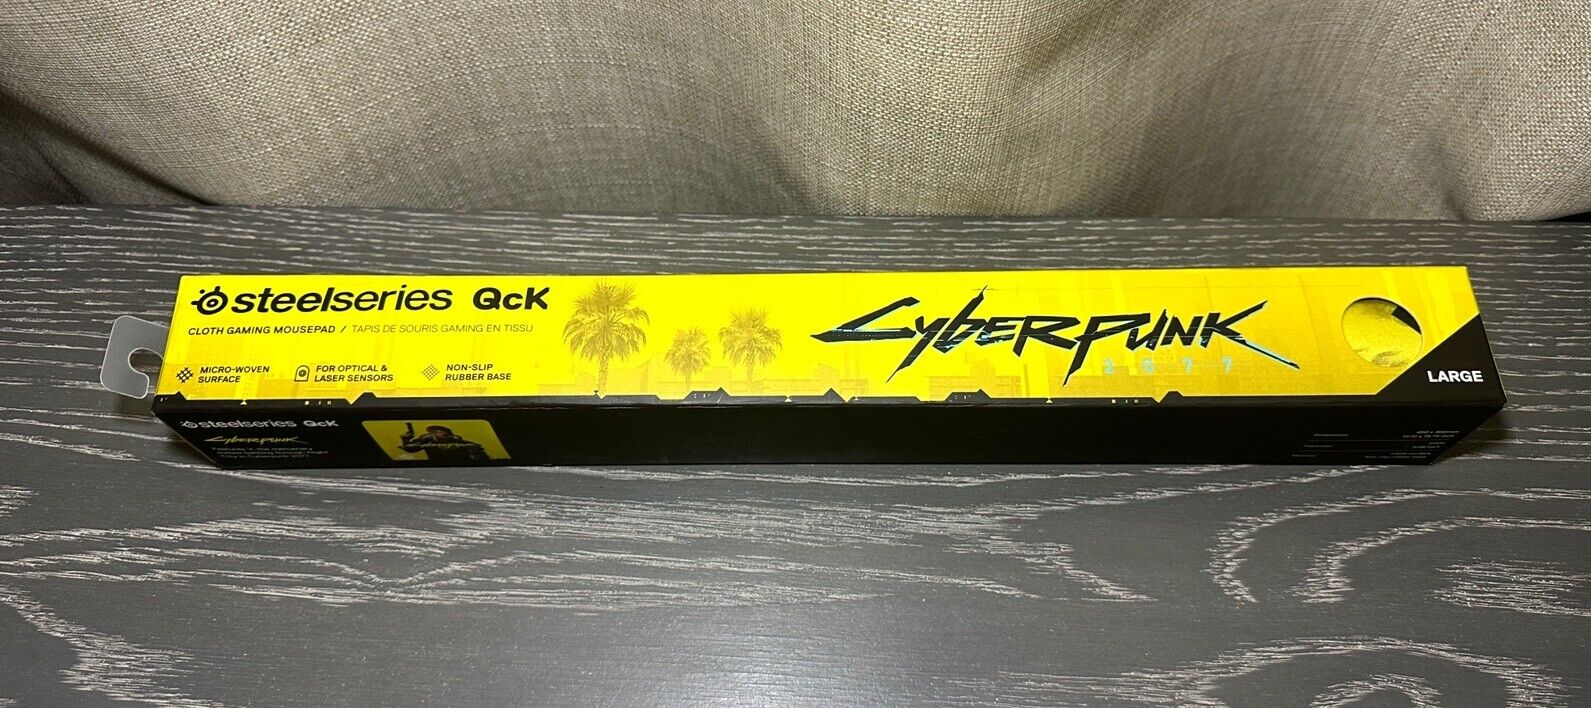 SteelSeries QcK Cyberpunk 2077 LIMITED EDITION Large Gaming Mousepad New